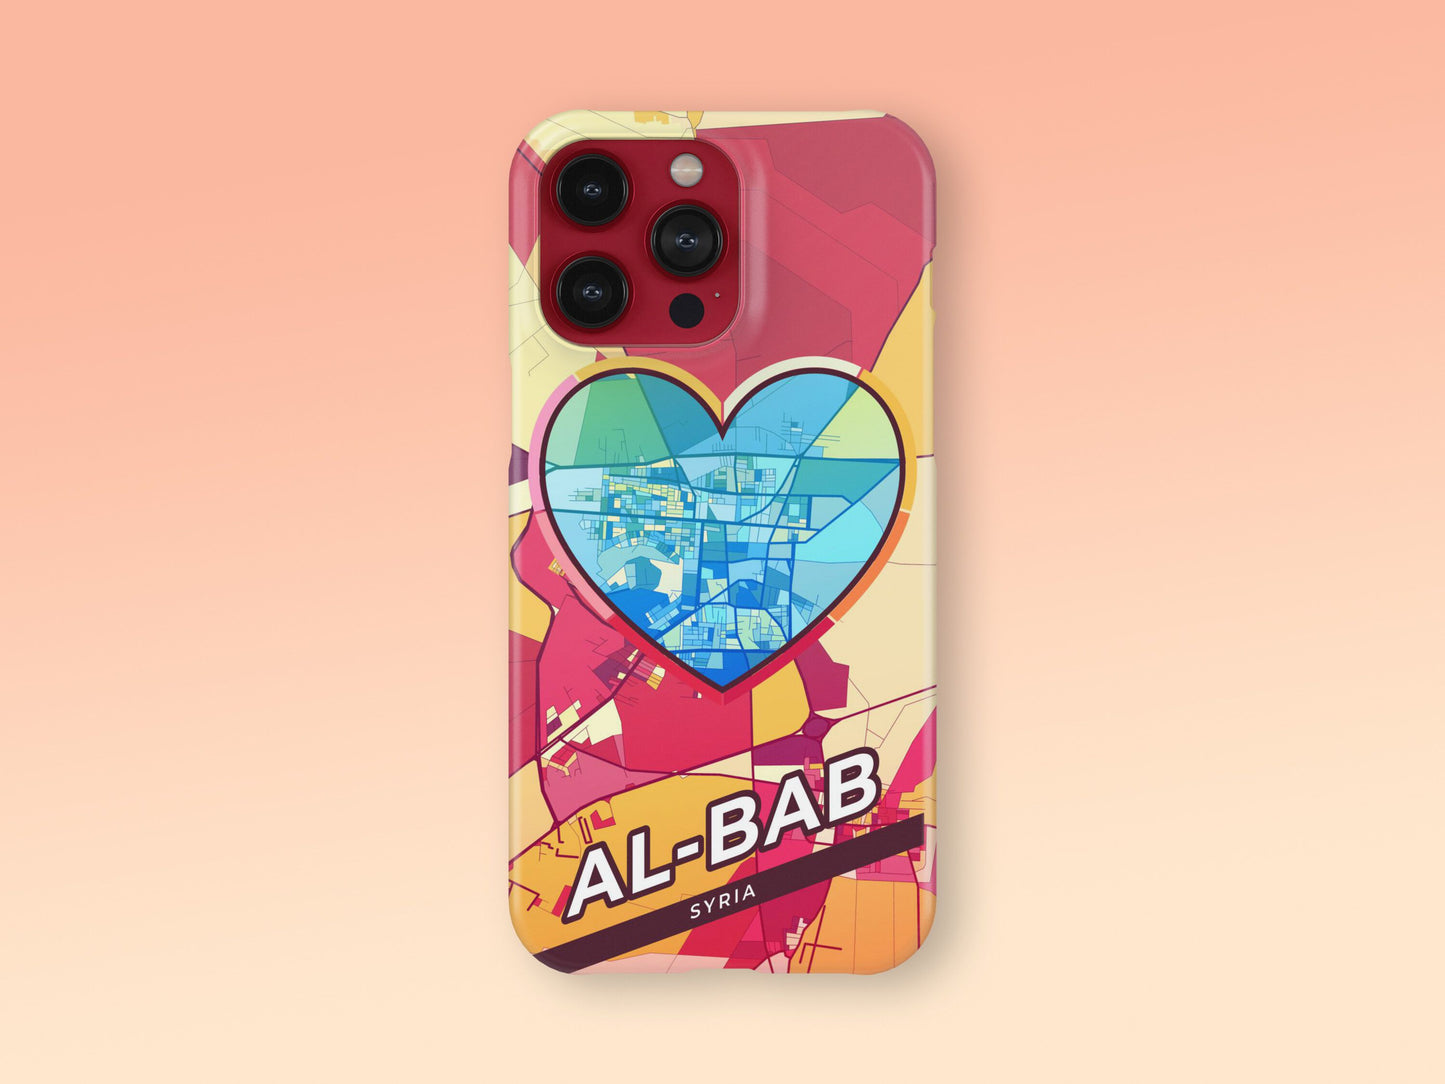 Al-Bab Syria slim phone case with colorful icon. Birthday, wedding or housewarming gift. Couple match cases. 2